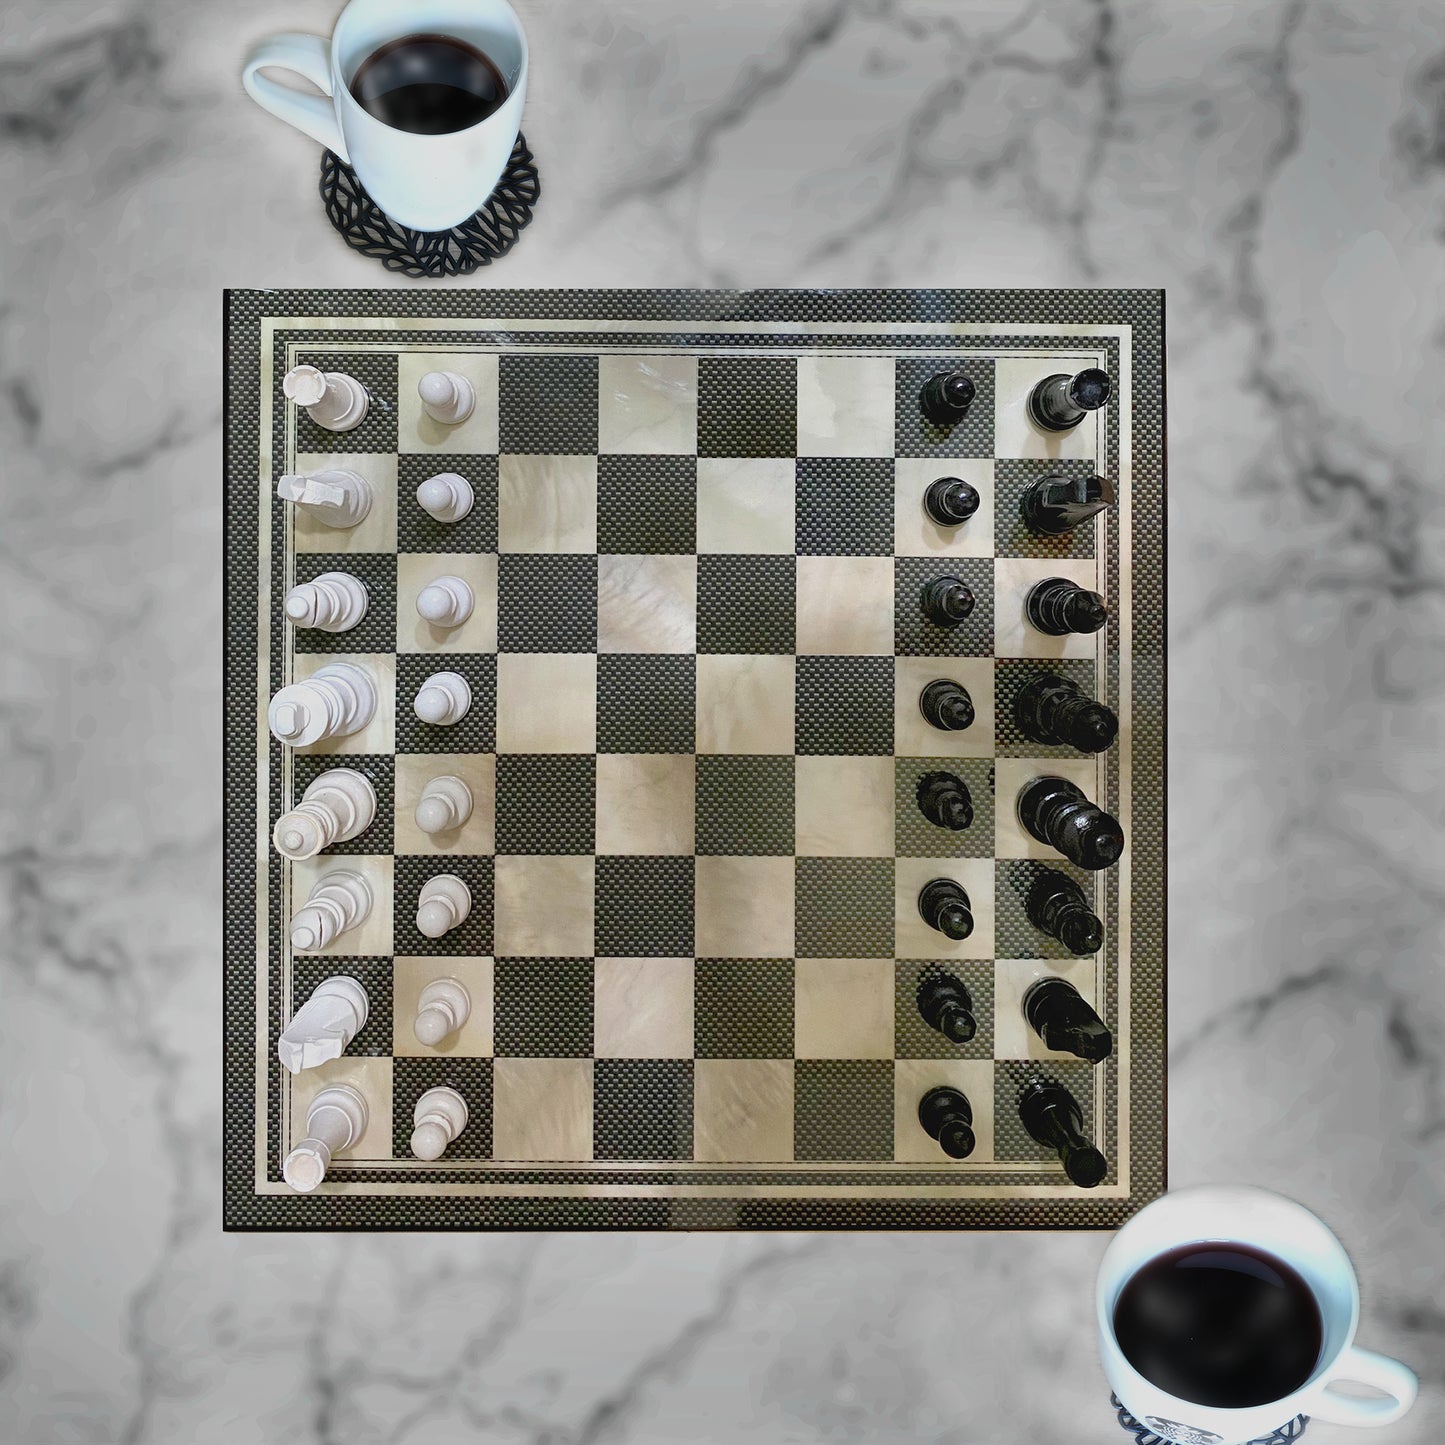 A5048 Chess Set with Chessmen, Glossy Carbon Fiber